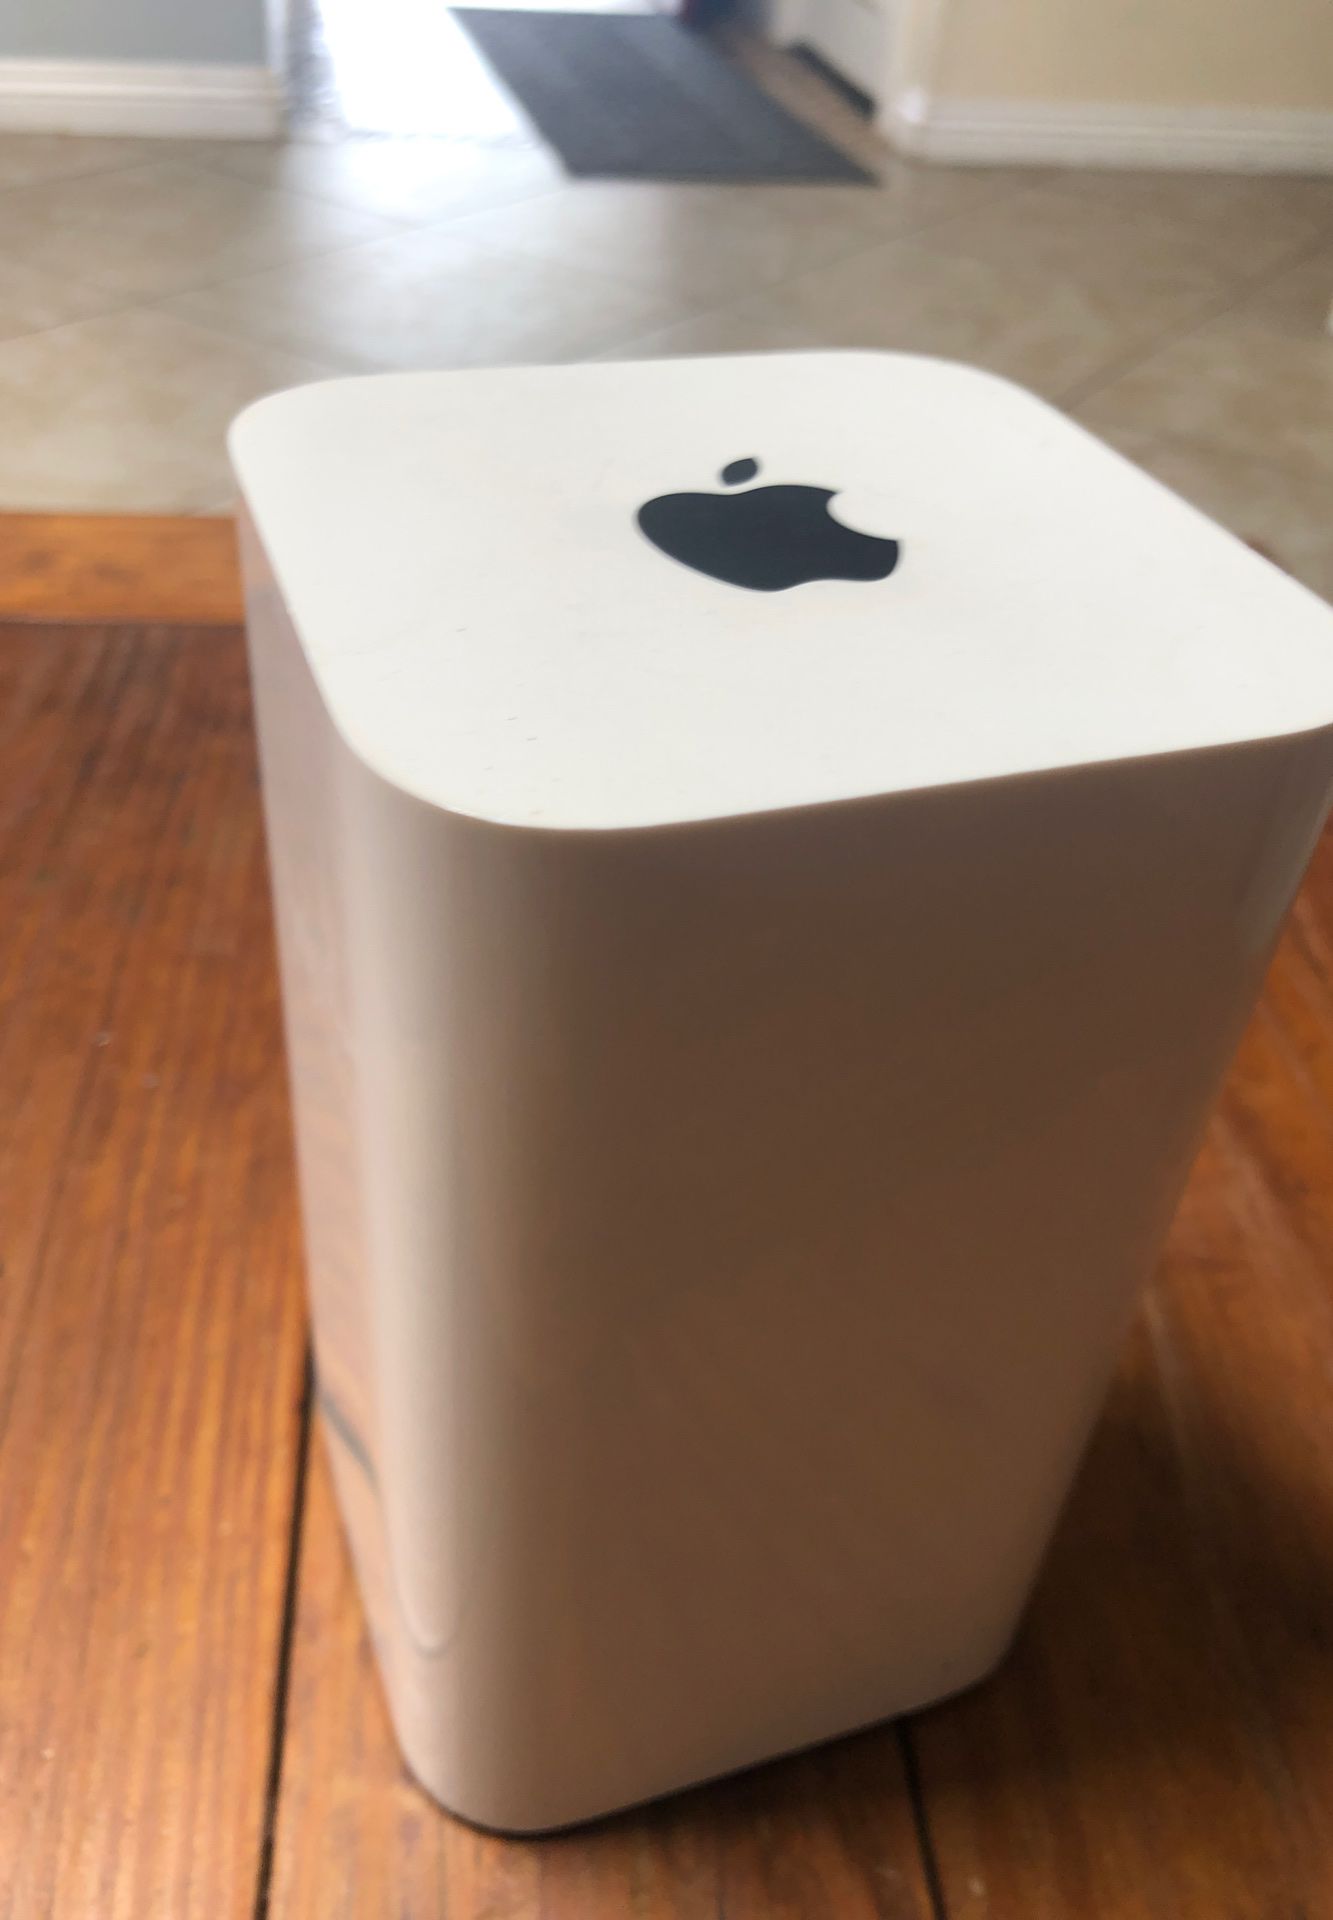 Apple Airport WIFI router and 1 TB hard drive